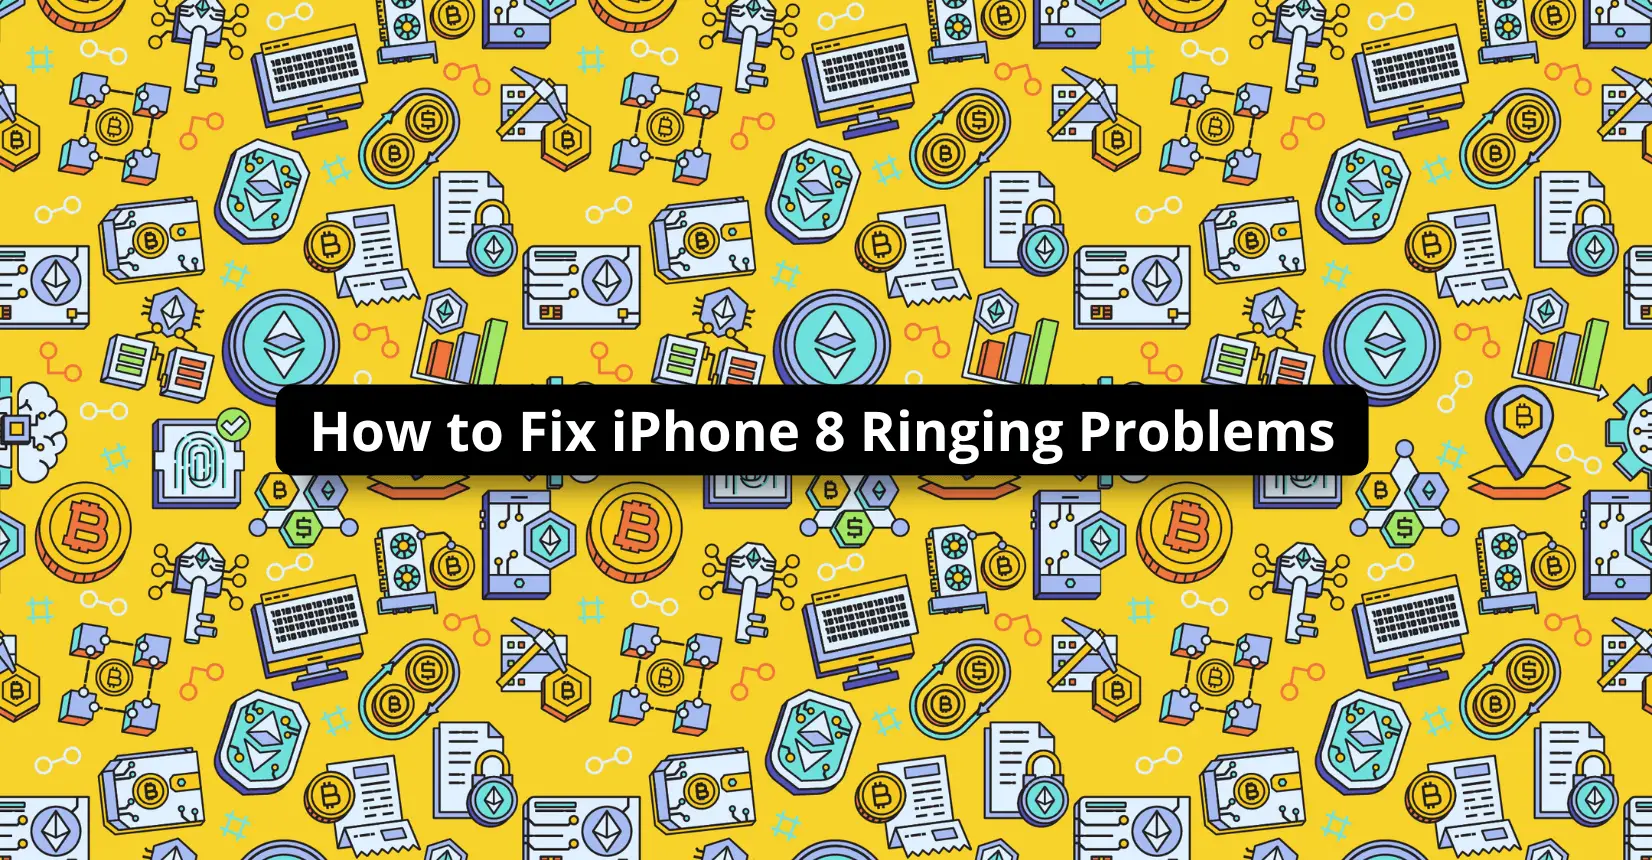 How to Fix iPhone 8 Ringing Problems